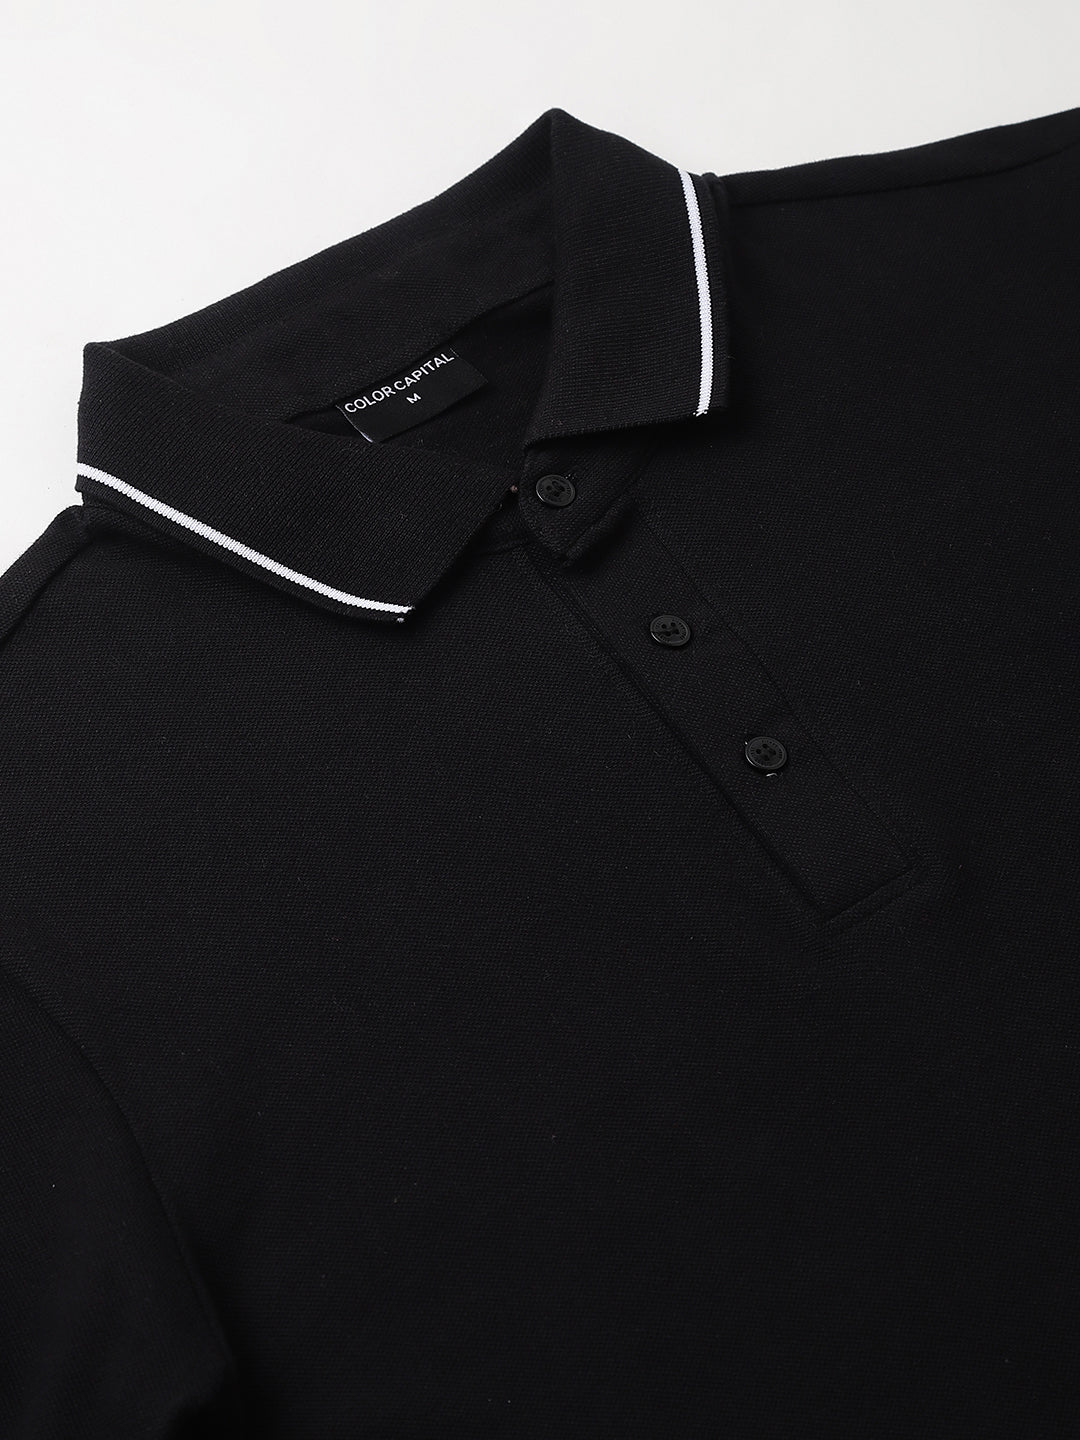 Black Classic White Tipping Polo